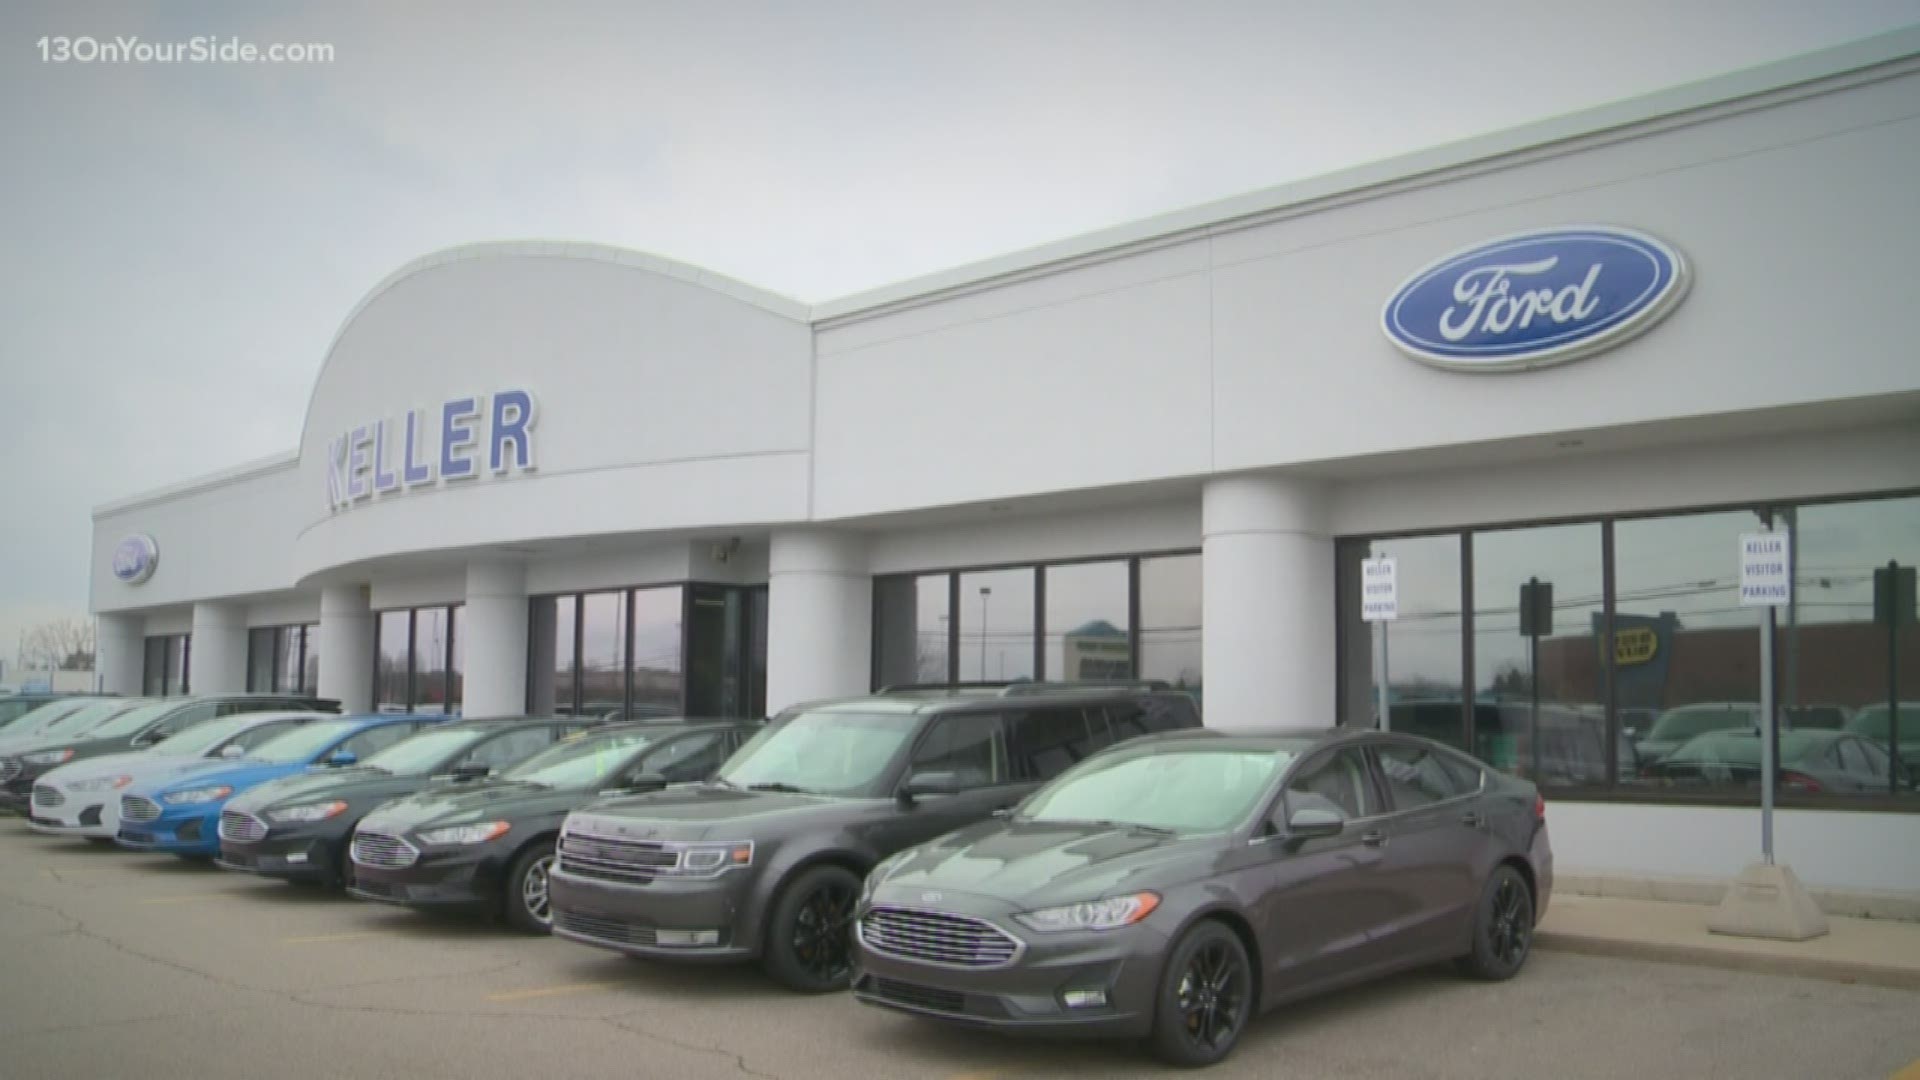 Whether shopping for a new vehicle or needing service on an existing one, Keller Ford has got you covered, even in these days of COVID-19.